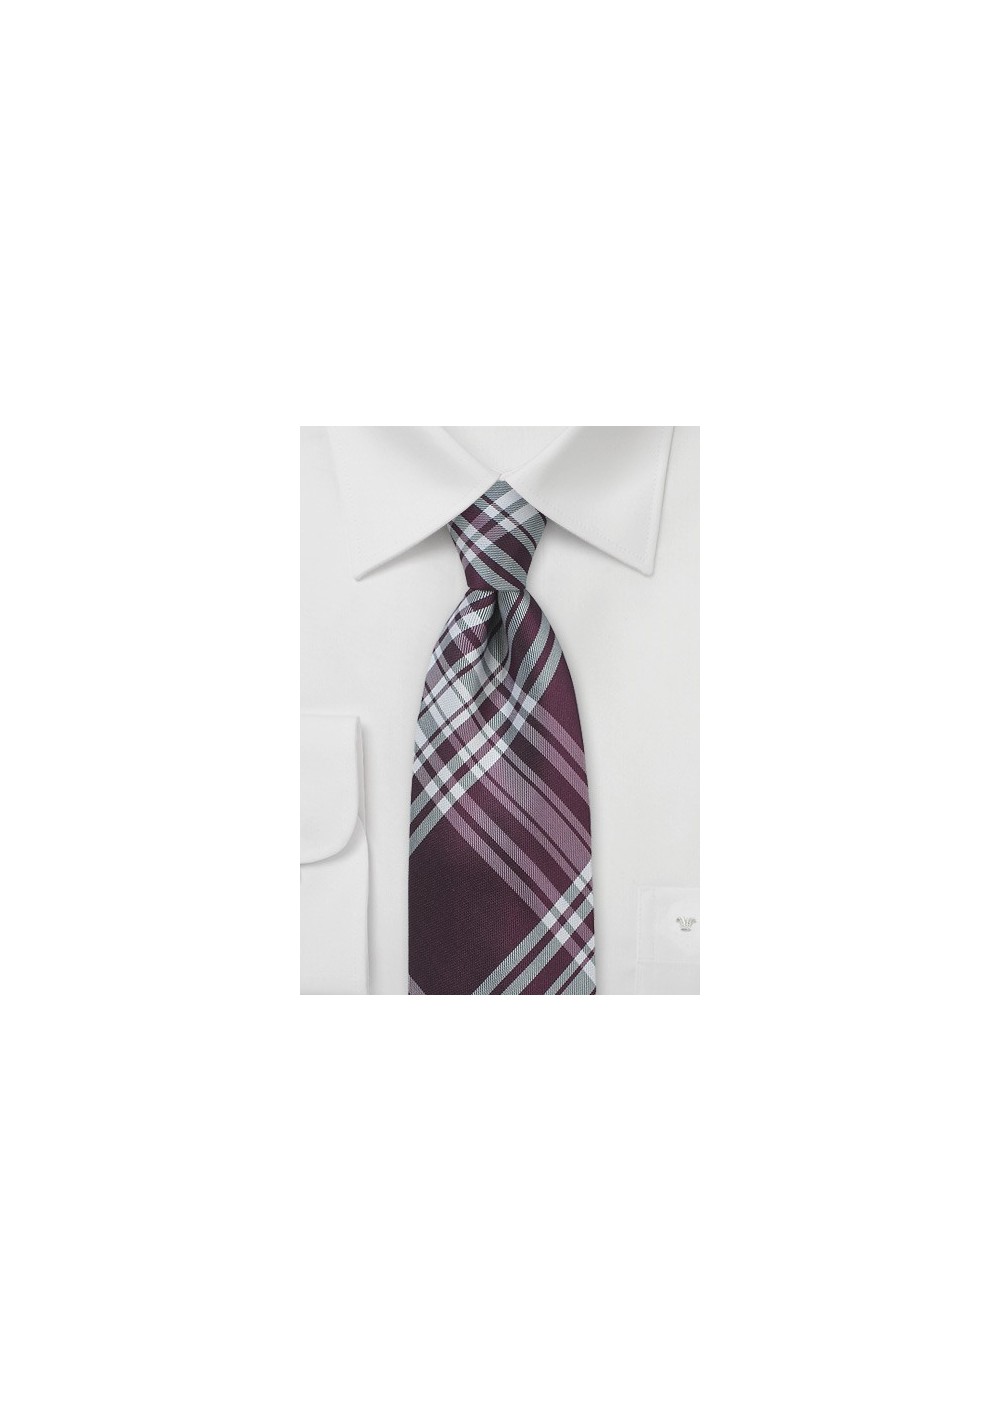 Burgundy Silk Tie with Large Scale Plaid Design